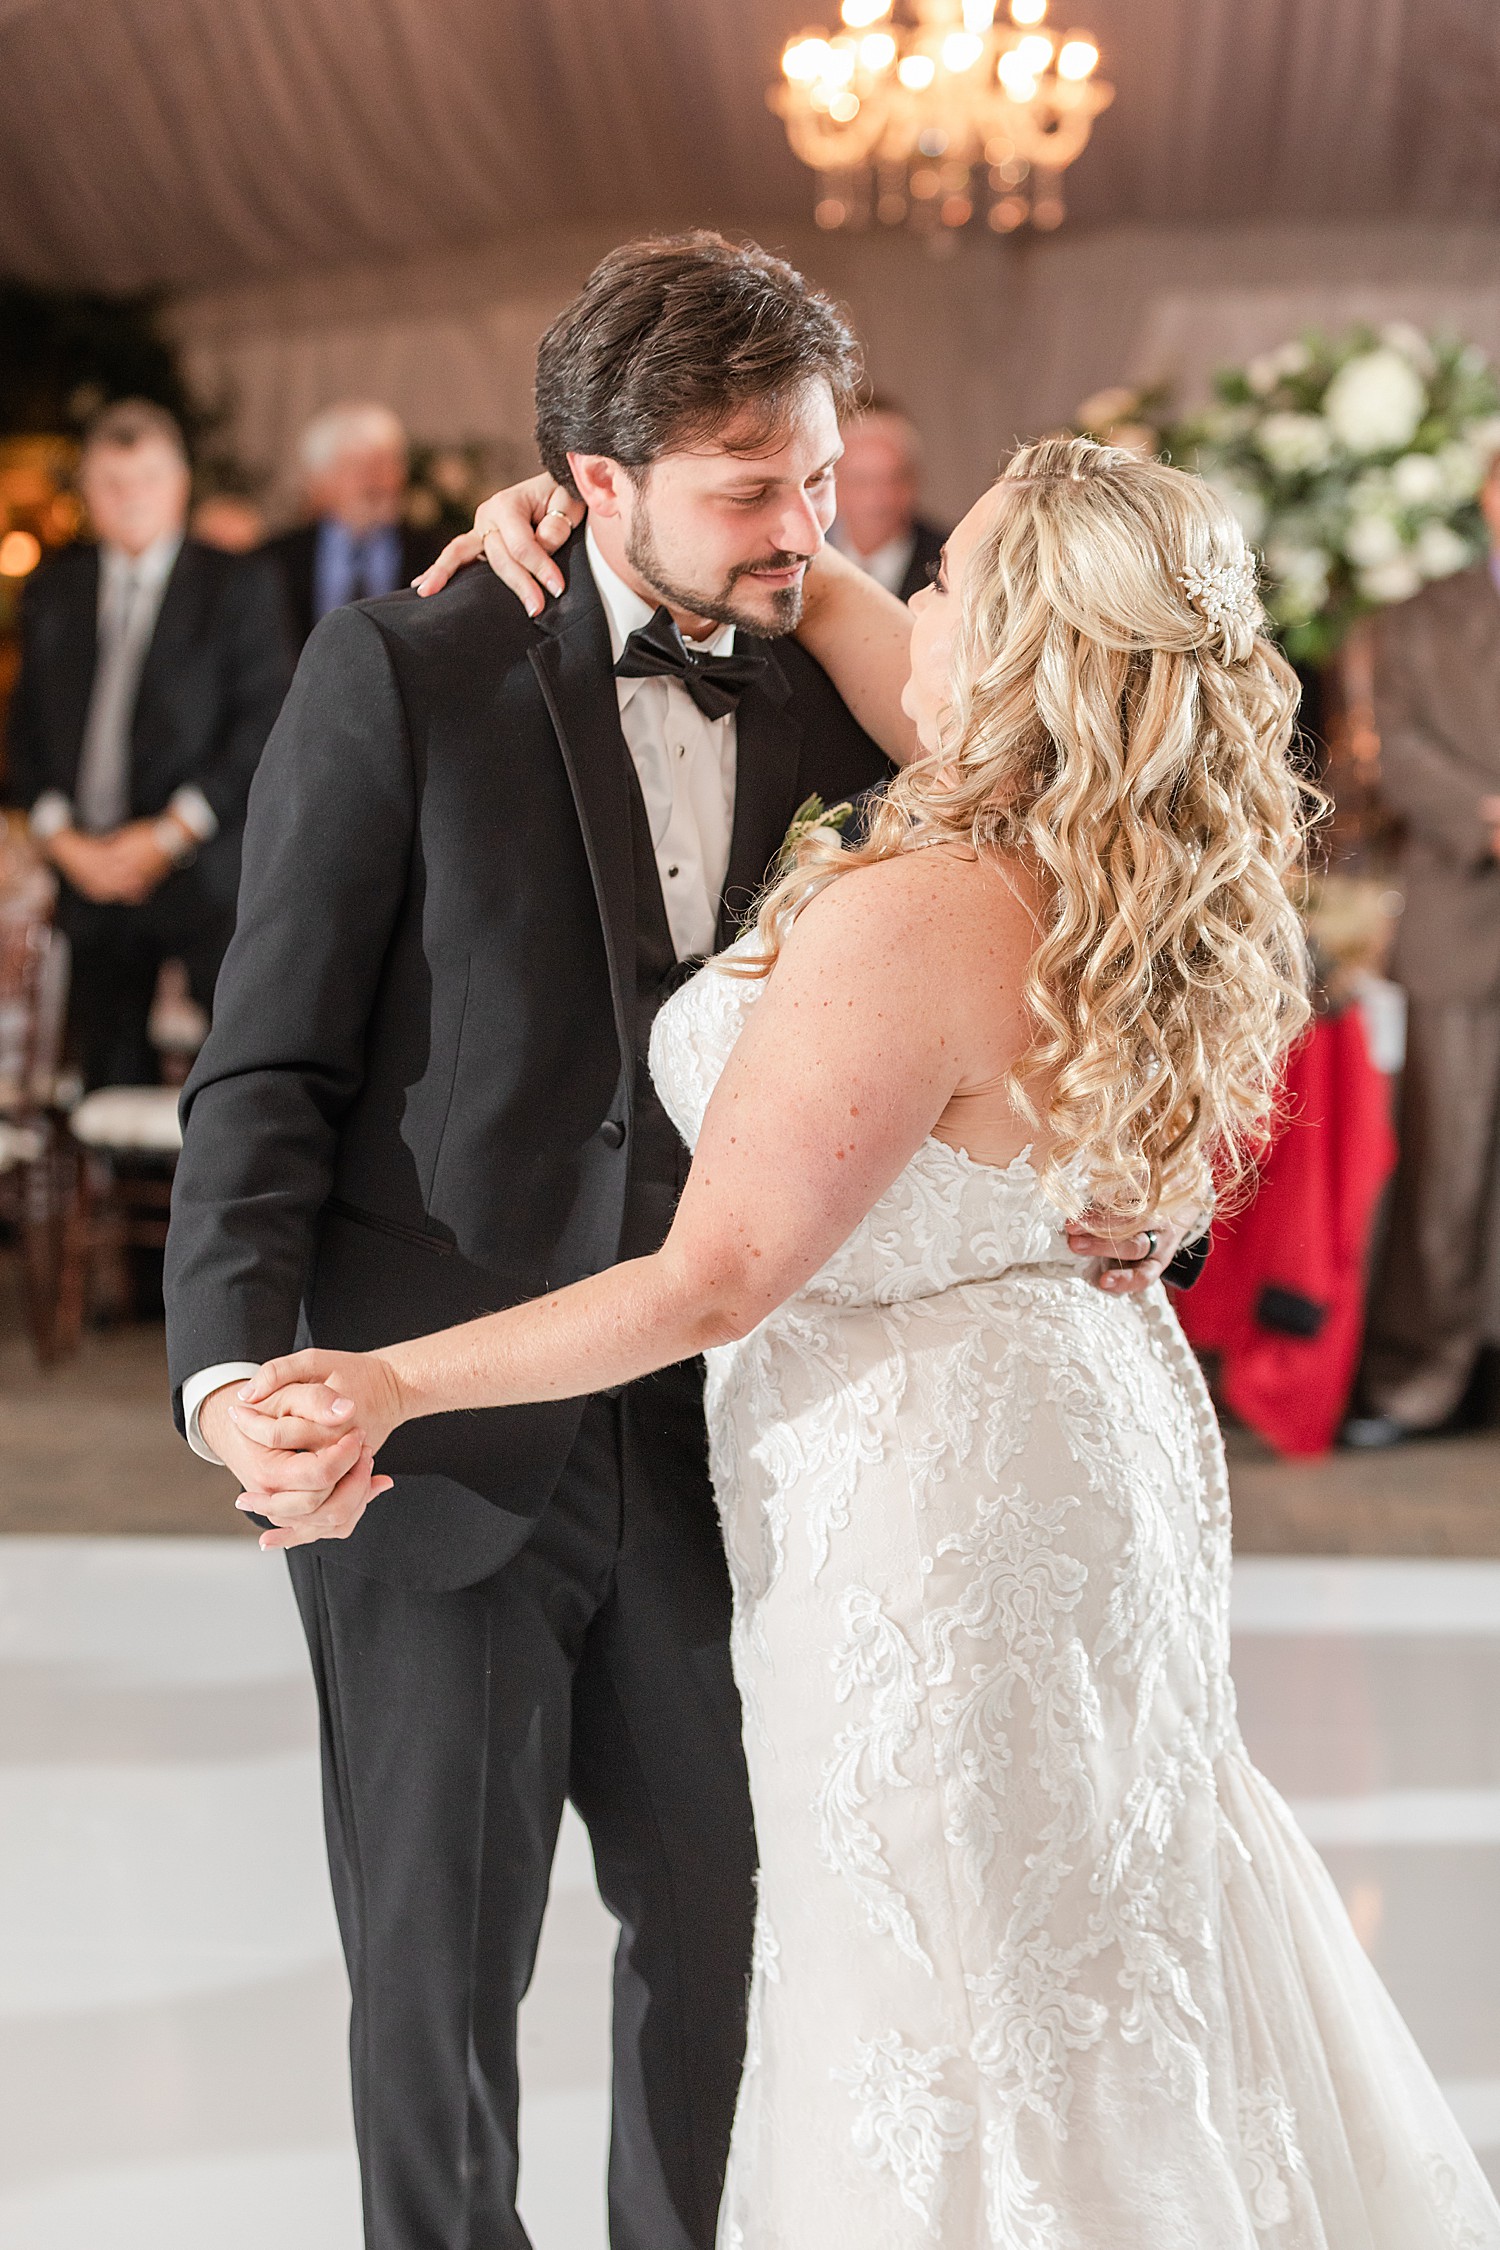 newlyweds first dance together at reception